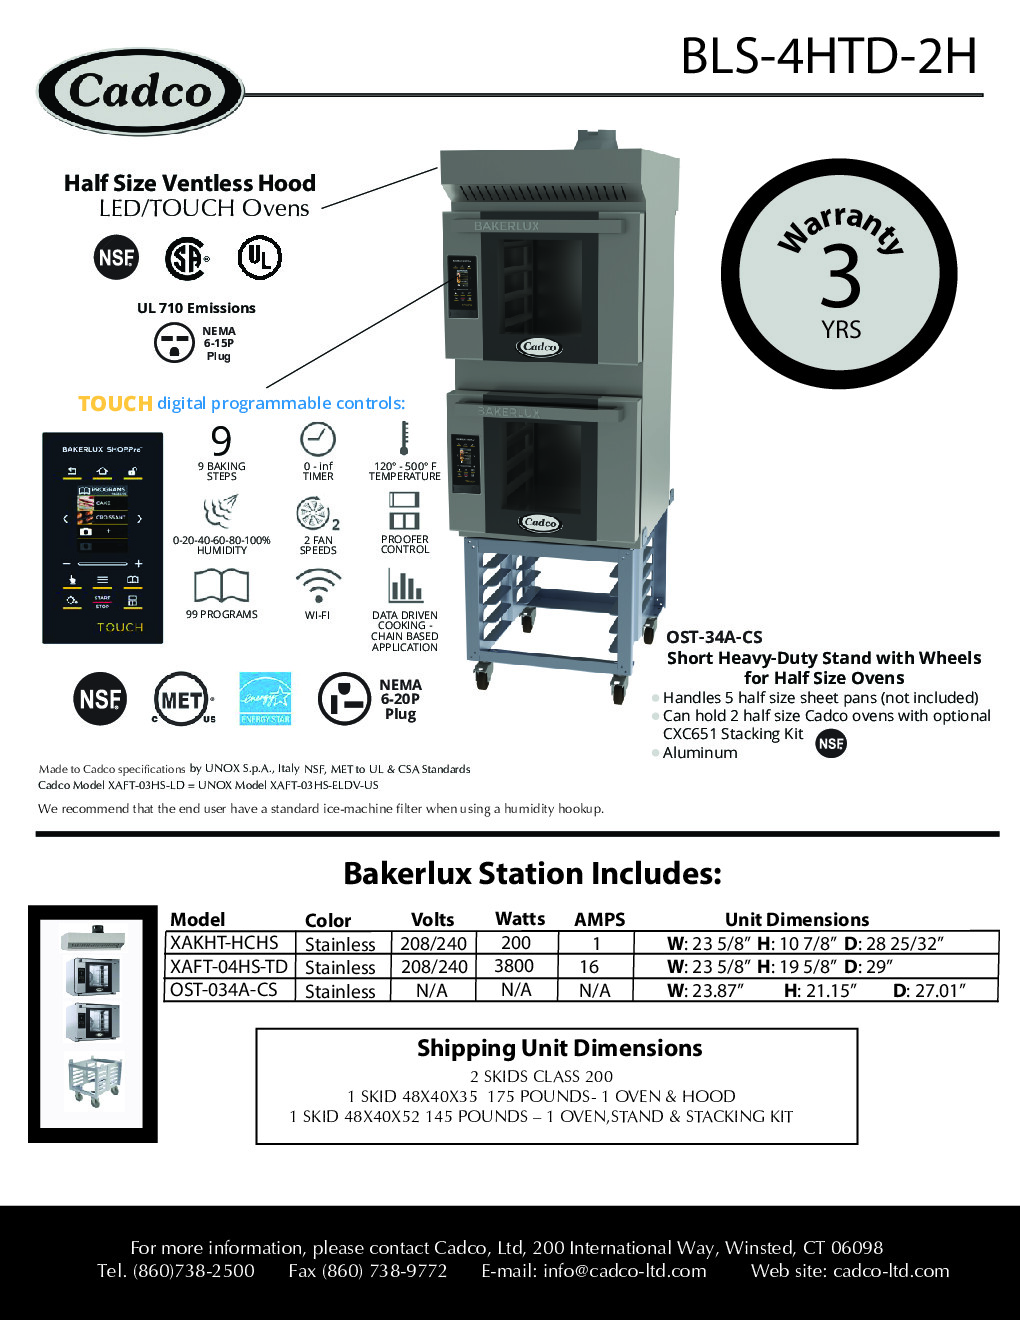 Cadco BLS-4HTD-2H Double Stack Half Size Electric Convection Oven w/ Ventless Hood, Digital Touch Controls